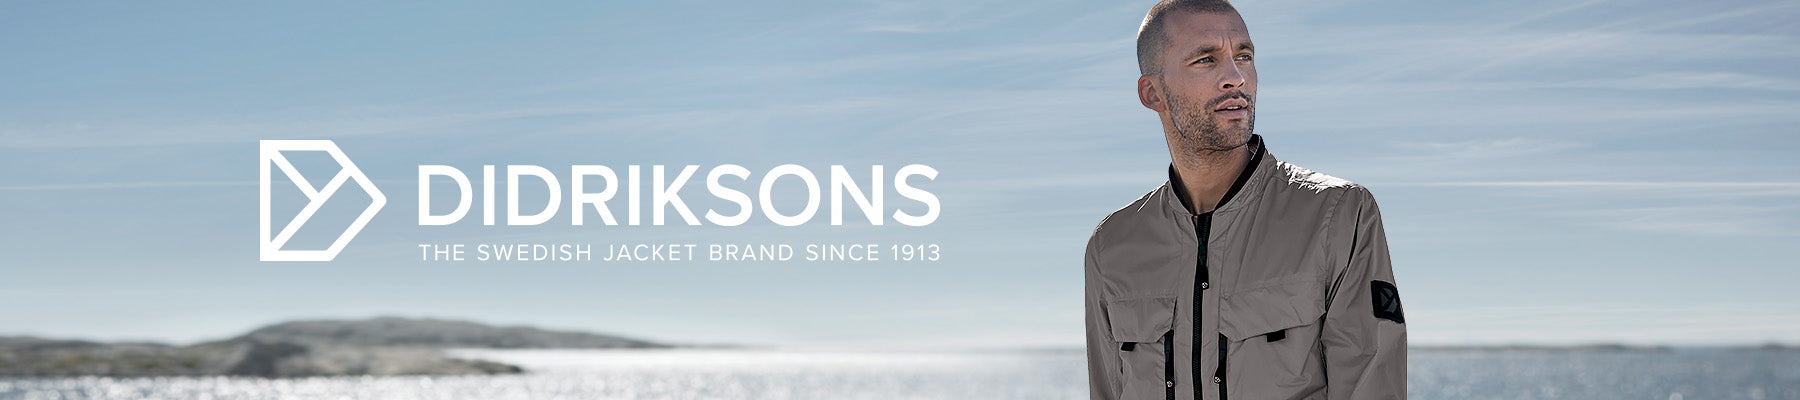 Didriksons is a Swedish outdoor clothing brand that has been in business for over 100 years.